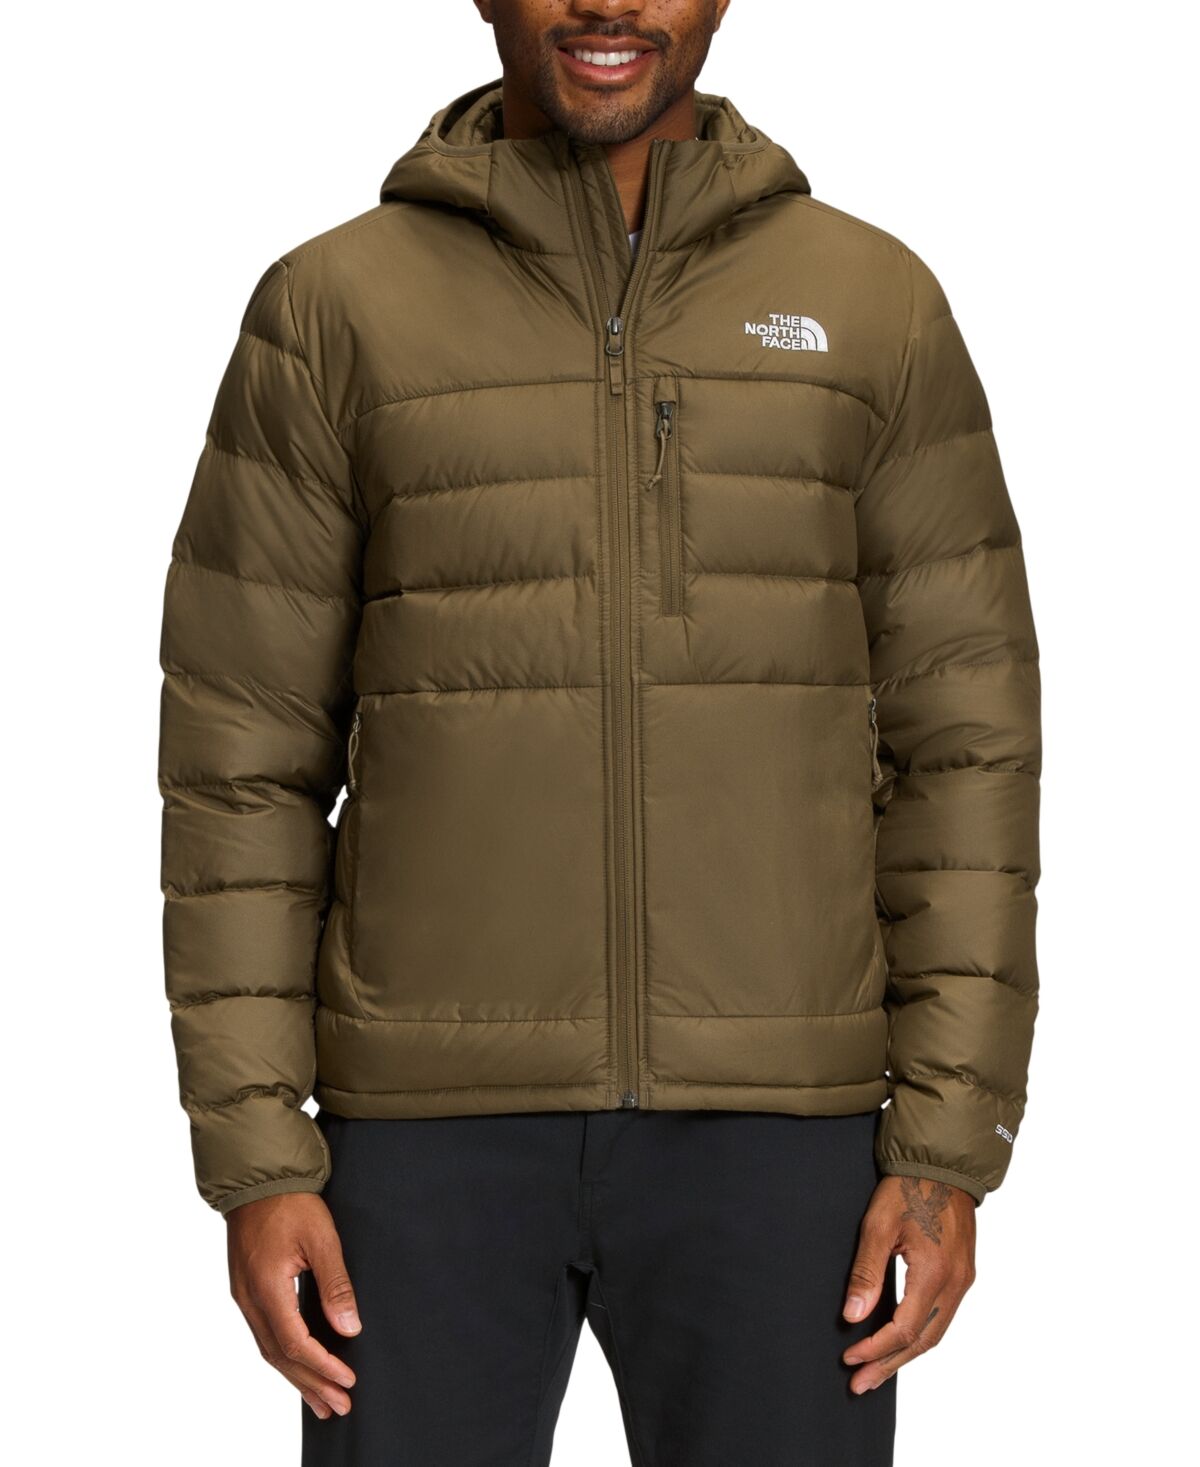 The North Face Men's Aconcagua 2 Hooded Jacket - Fiery Red